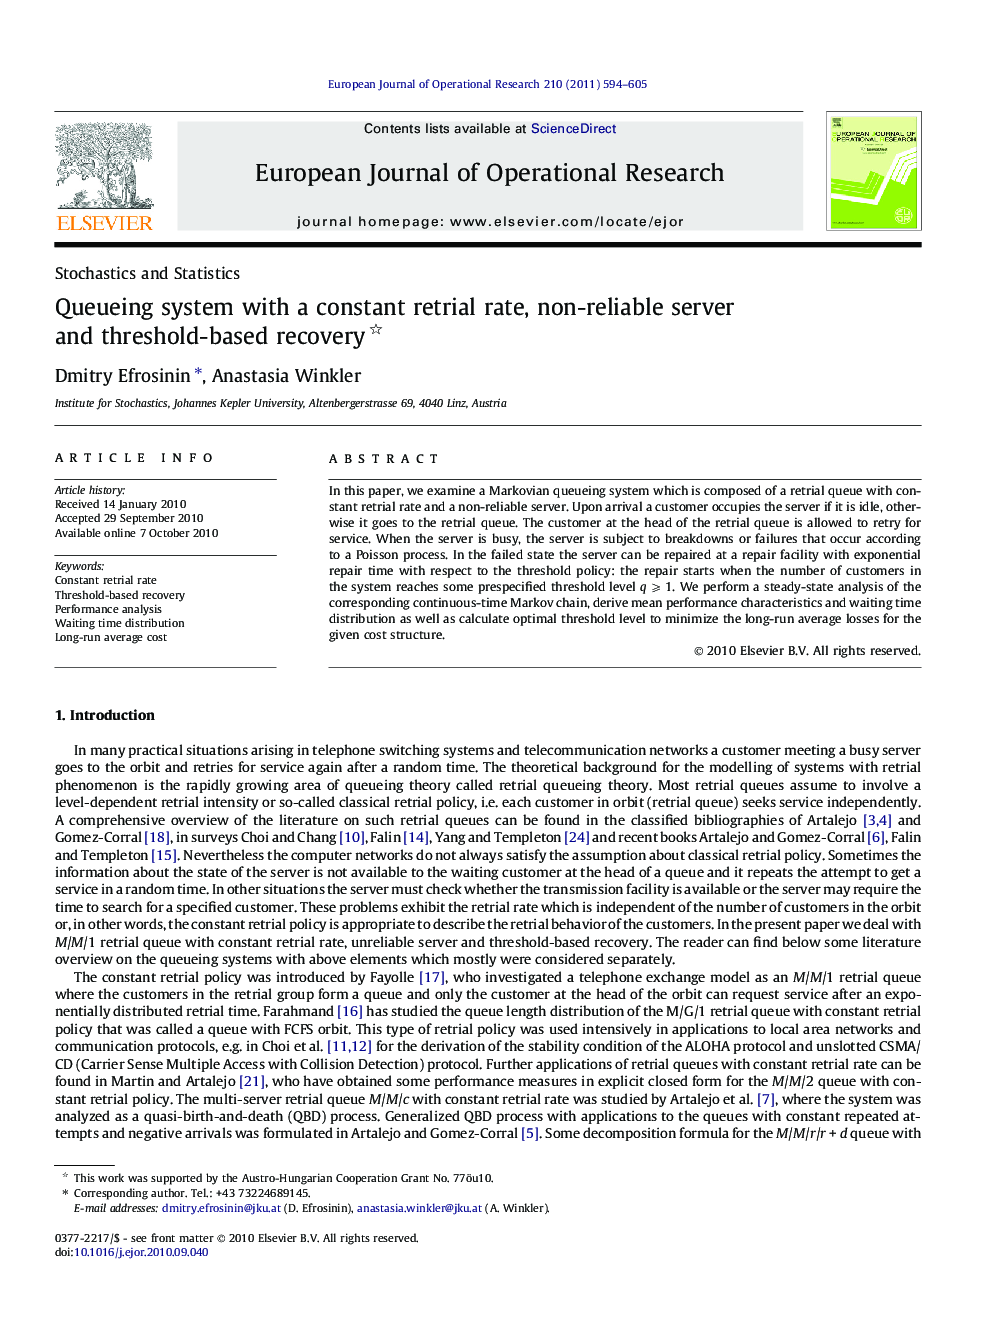 Queueing system with a constant retrial rate, non-reliable server and threshold-based recovery 